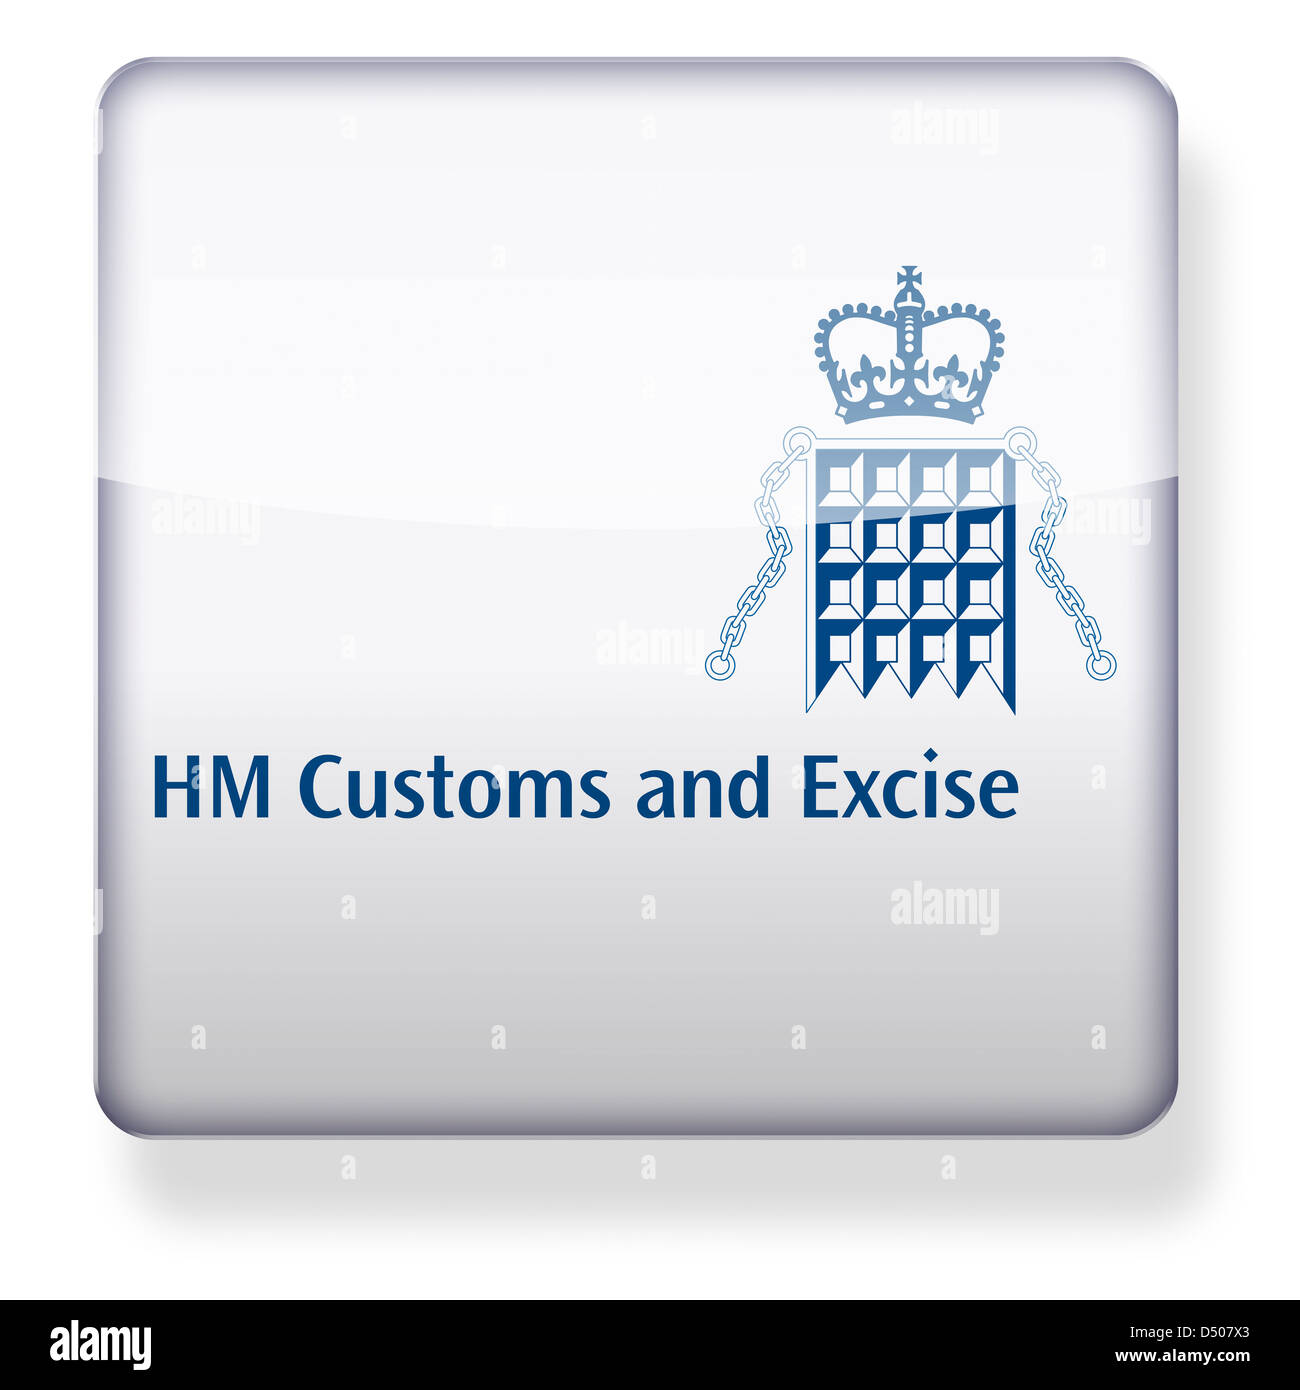 HM Customs & Excise logo as an app icon. Clipping path included. Stock Photo